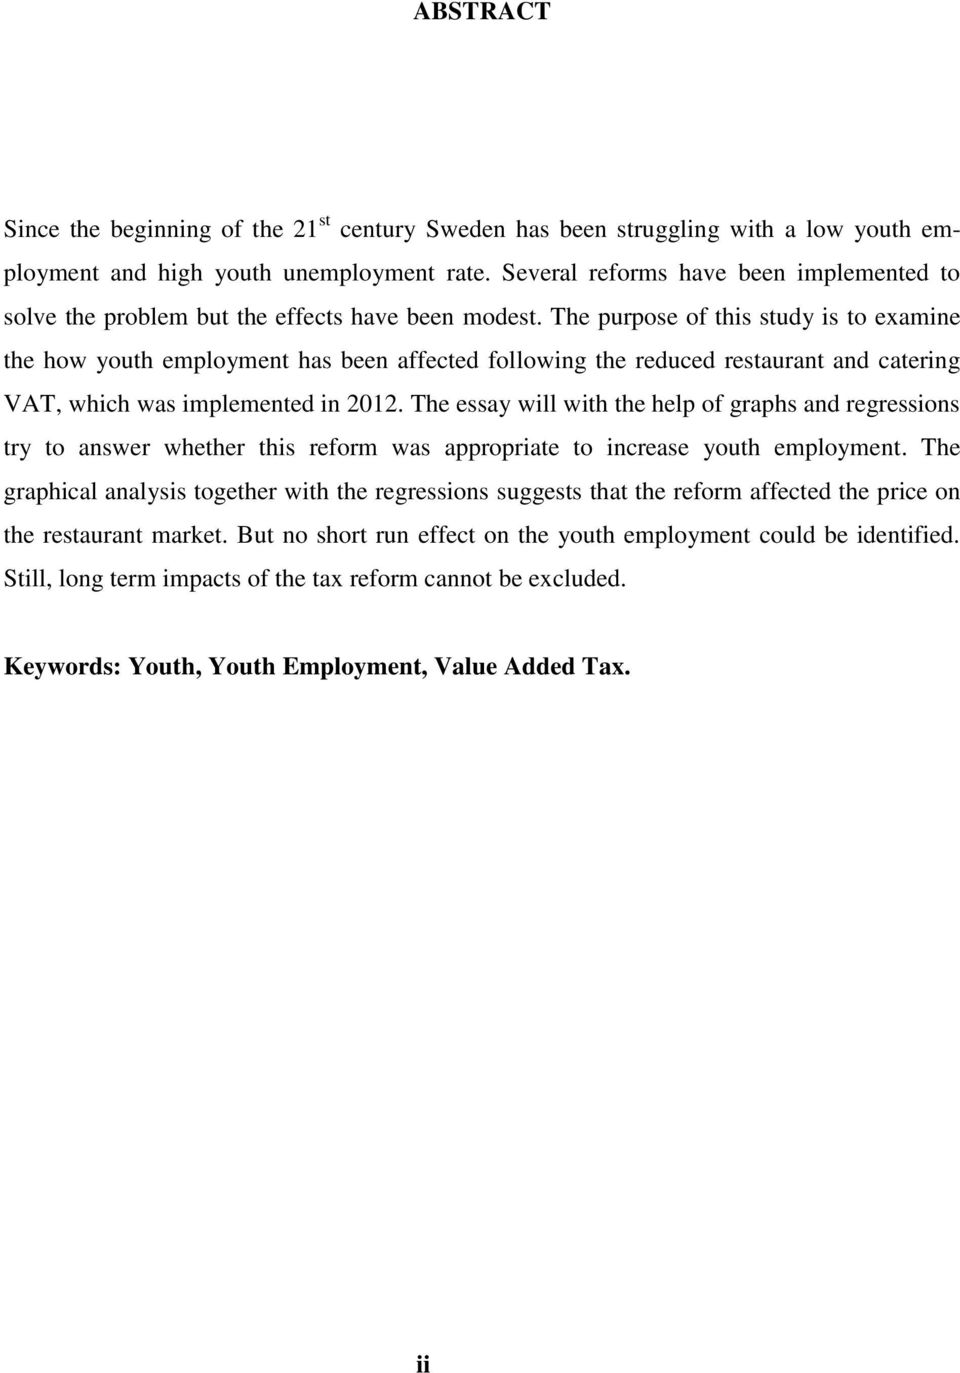 The purpose of this study is to examine the how youth employment has been affected following the reduced restaurant and catering VAT, which was implemented in 2012.